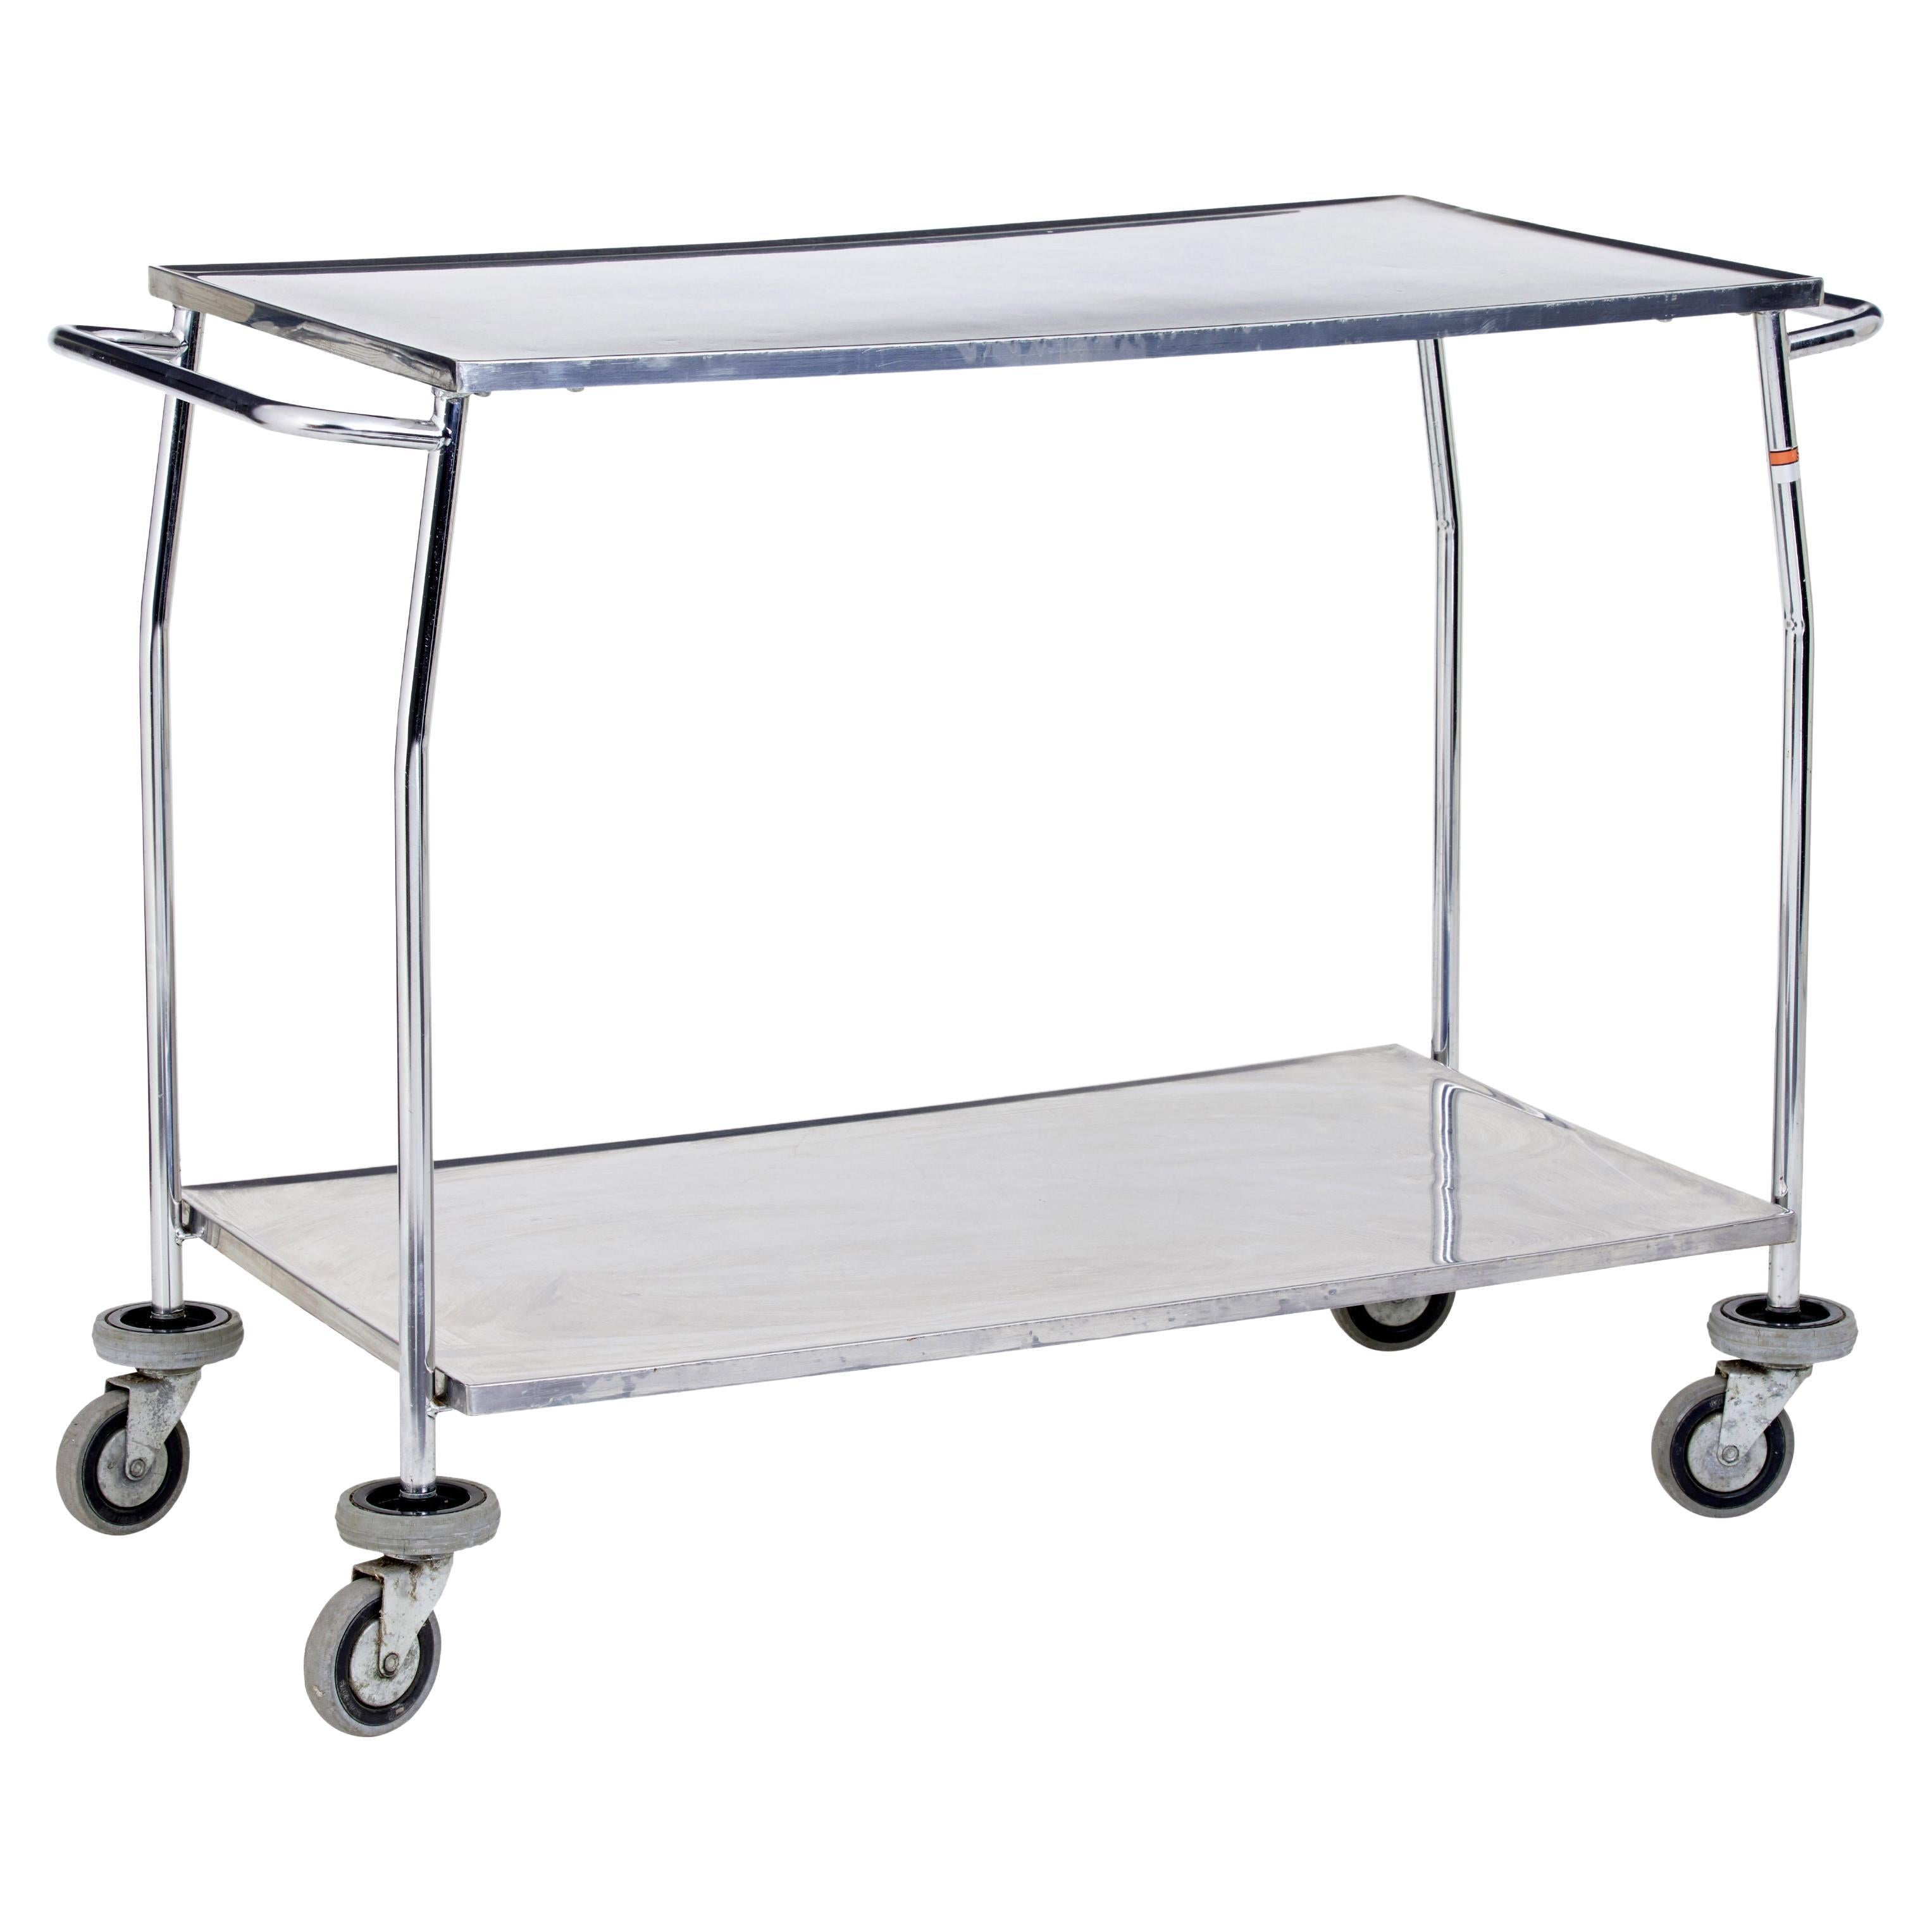 1970’s stainless steel medical trolley